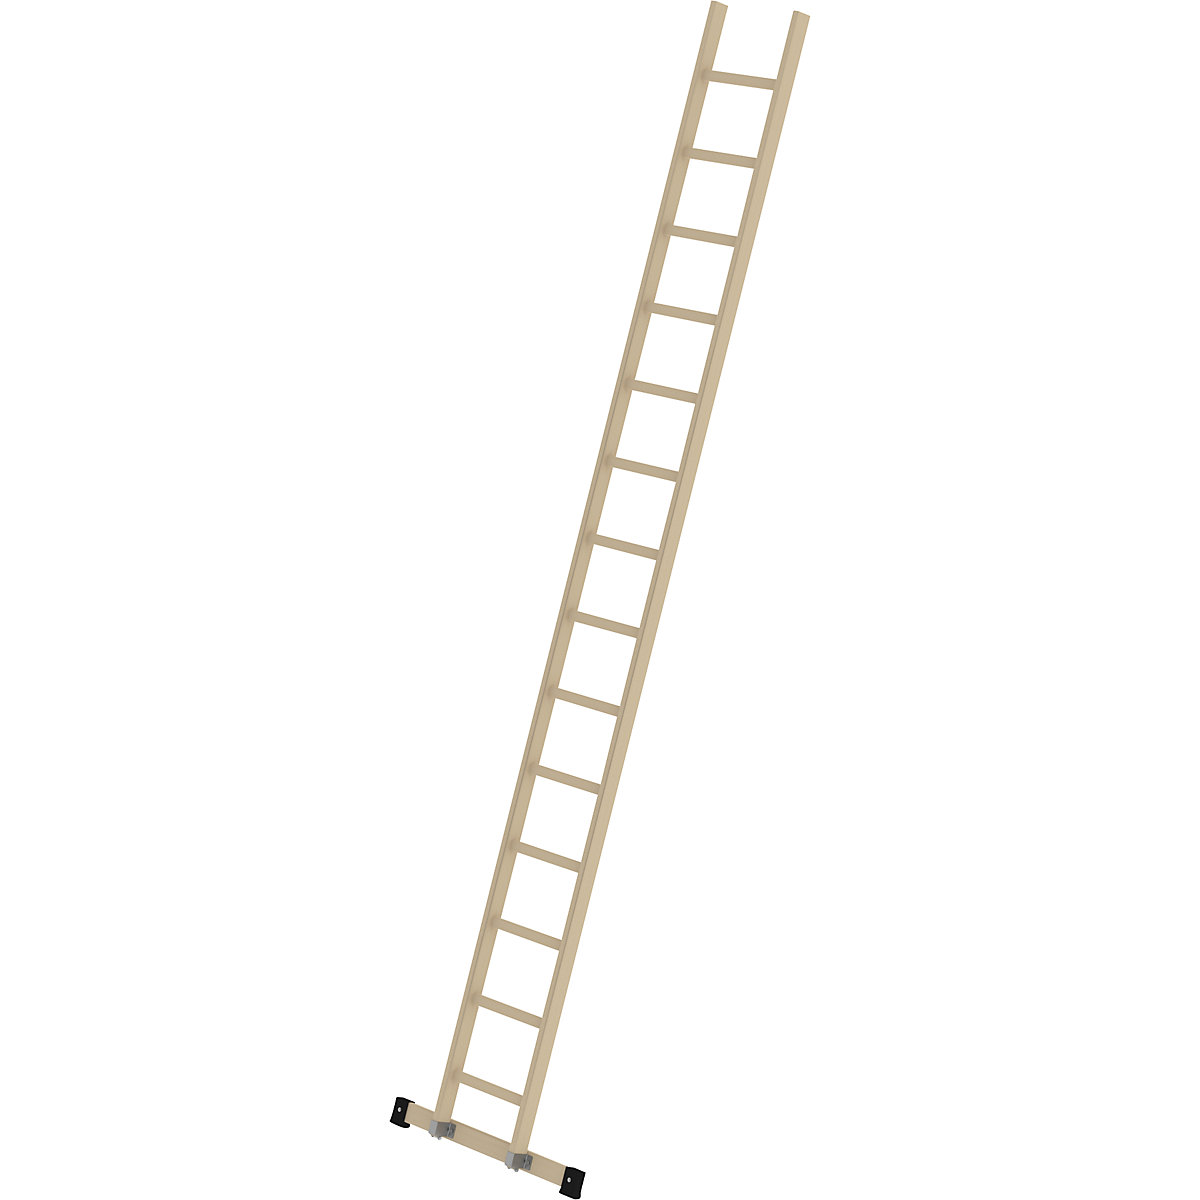 Wooden lean to ladder – MUNK, with rungs, 14 rungs incl. beams-3